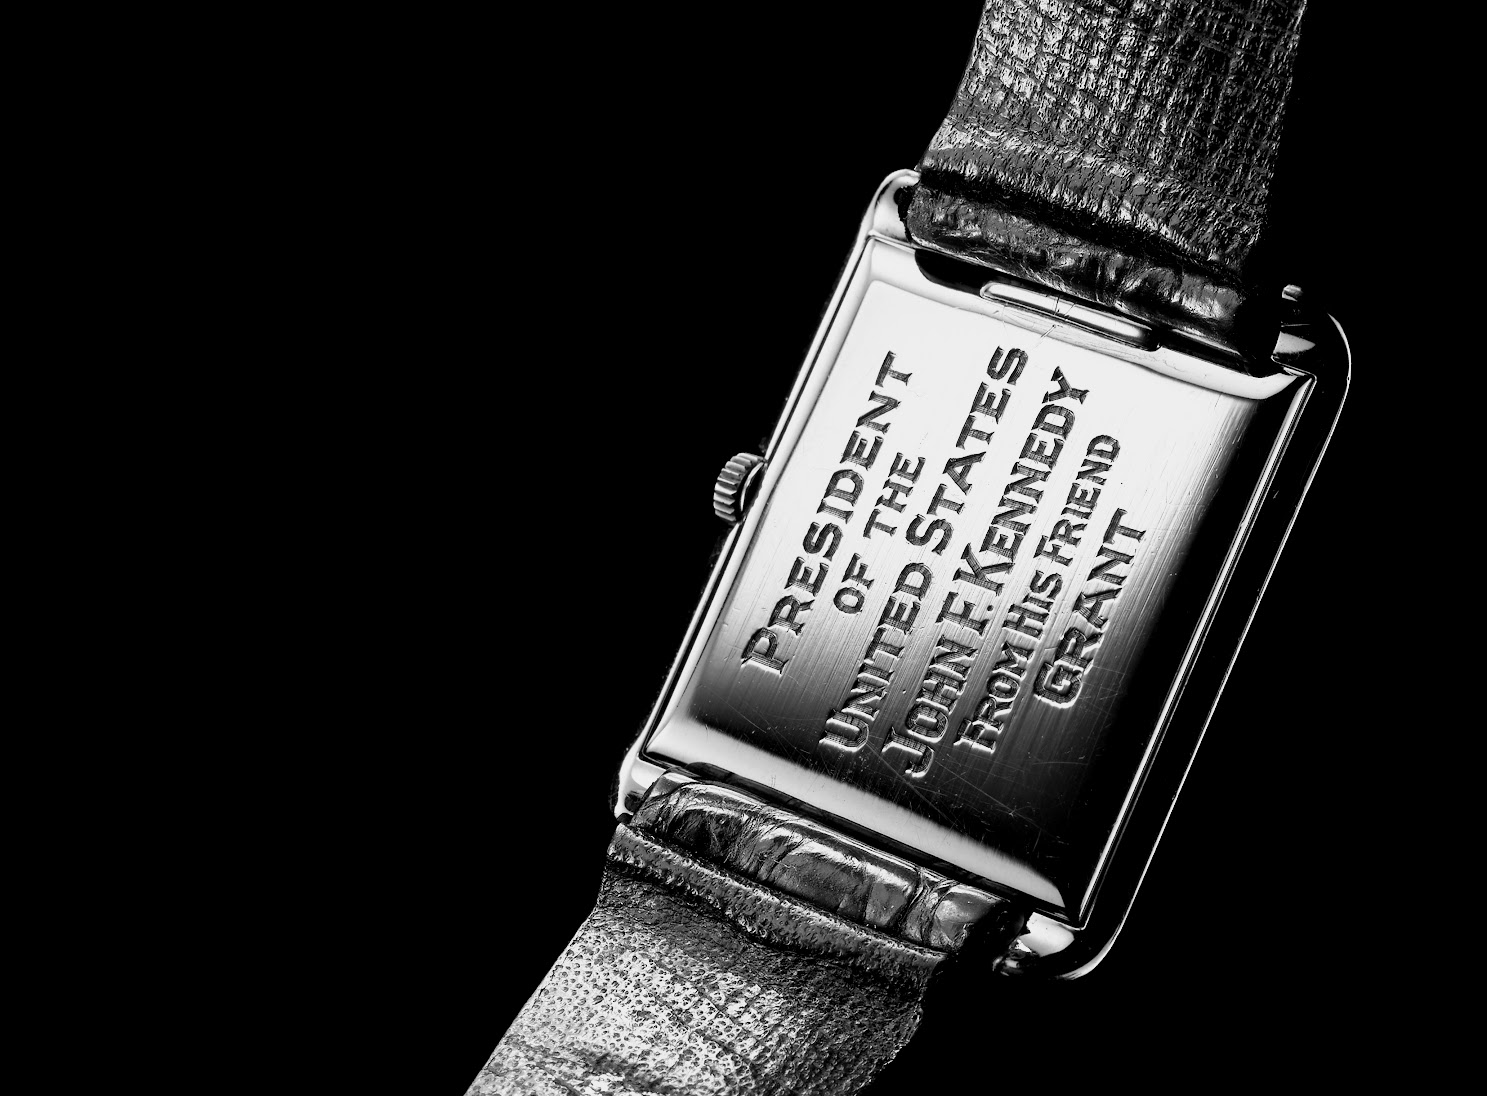 JFK’s Inauguration Watch at the Omega Museum